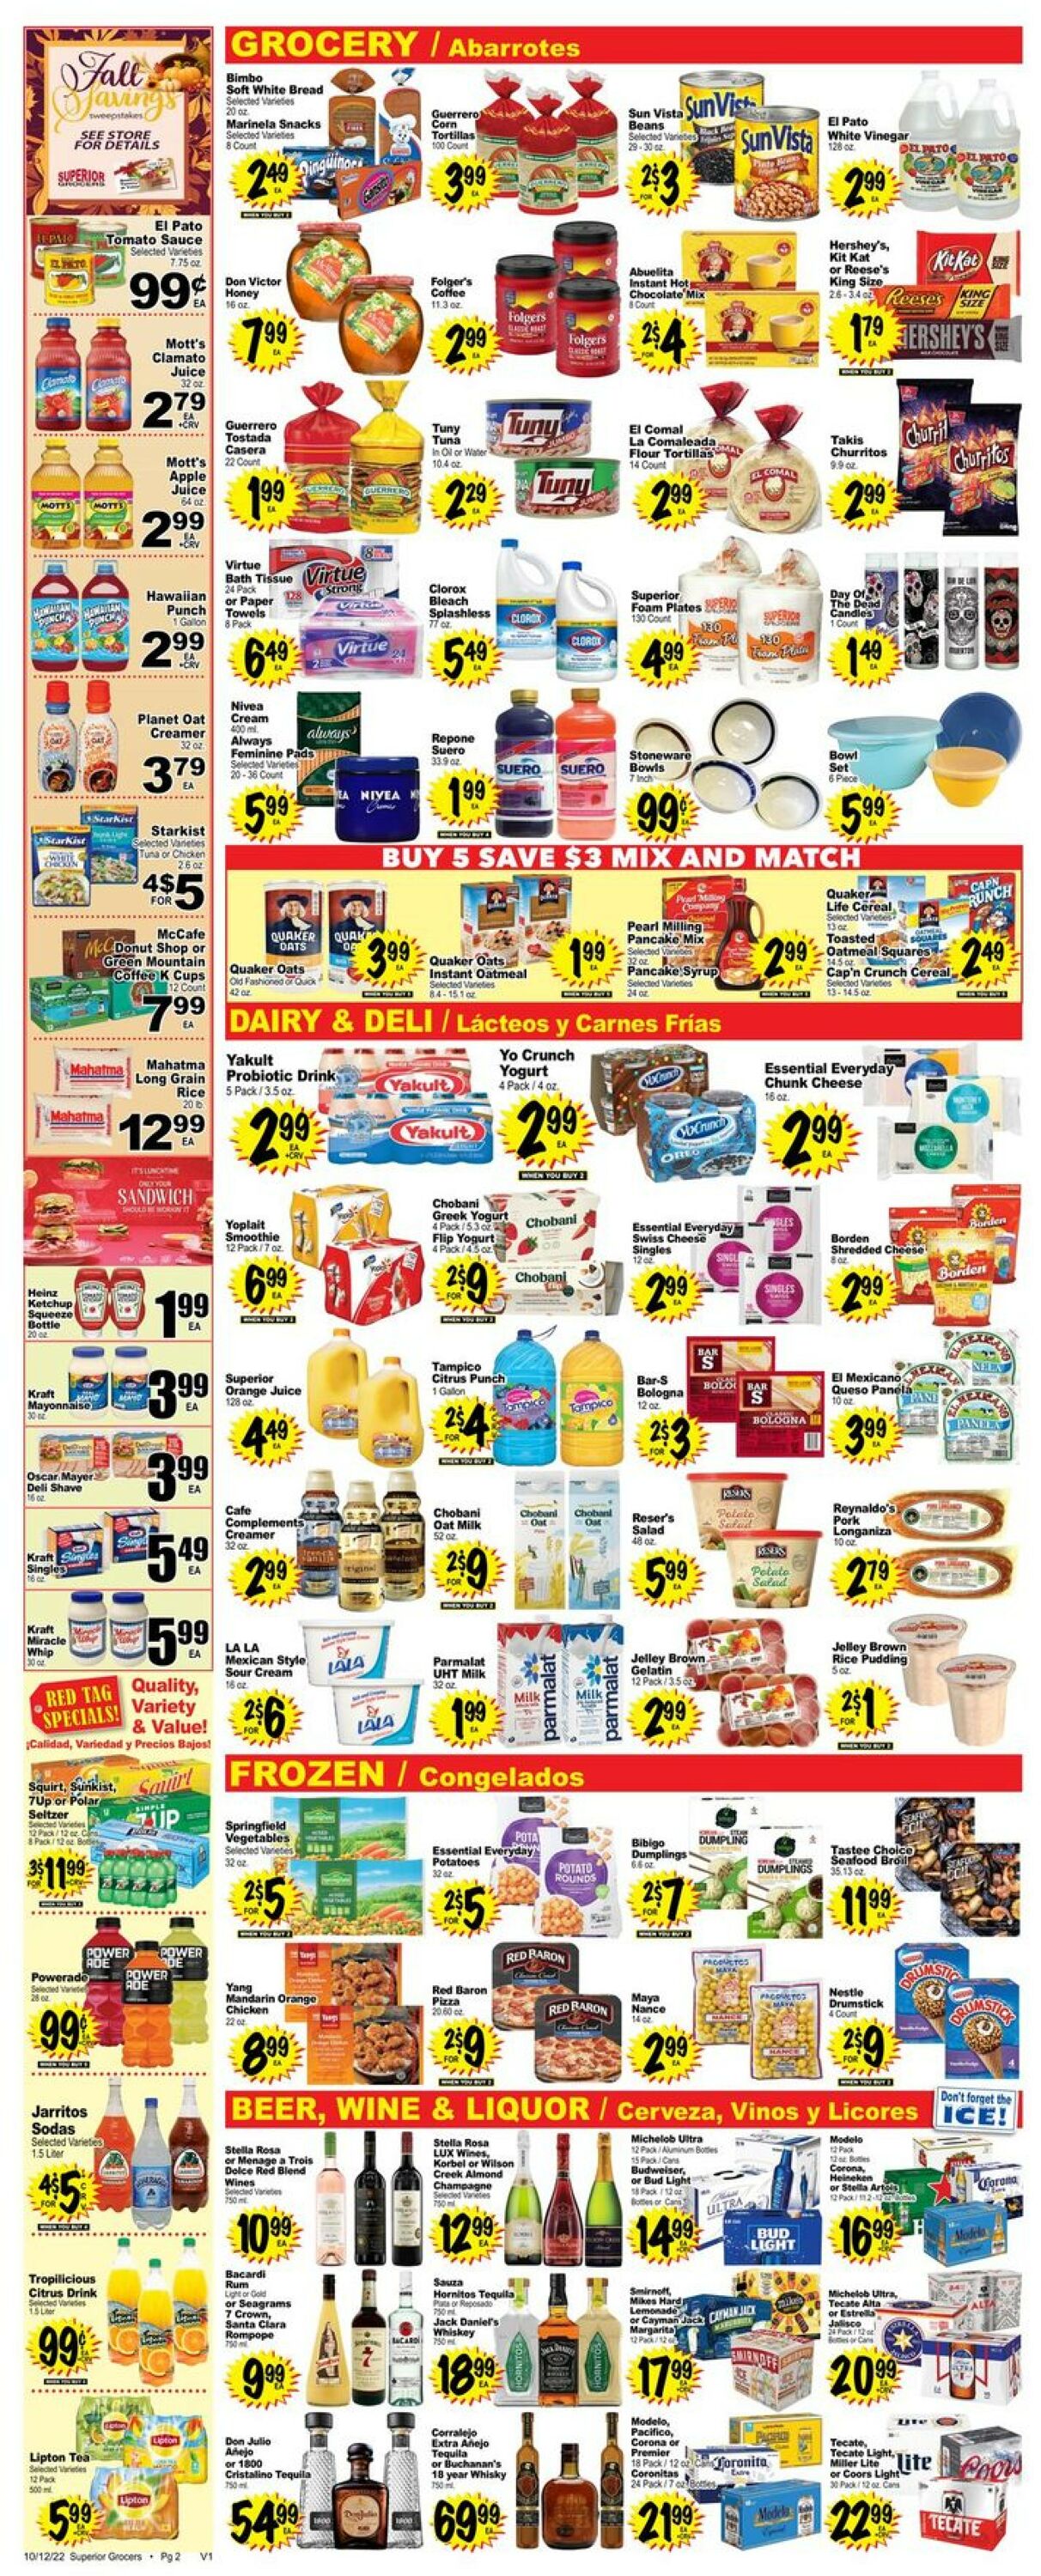 Superior Grocers Ad from 10/12/2022